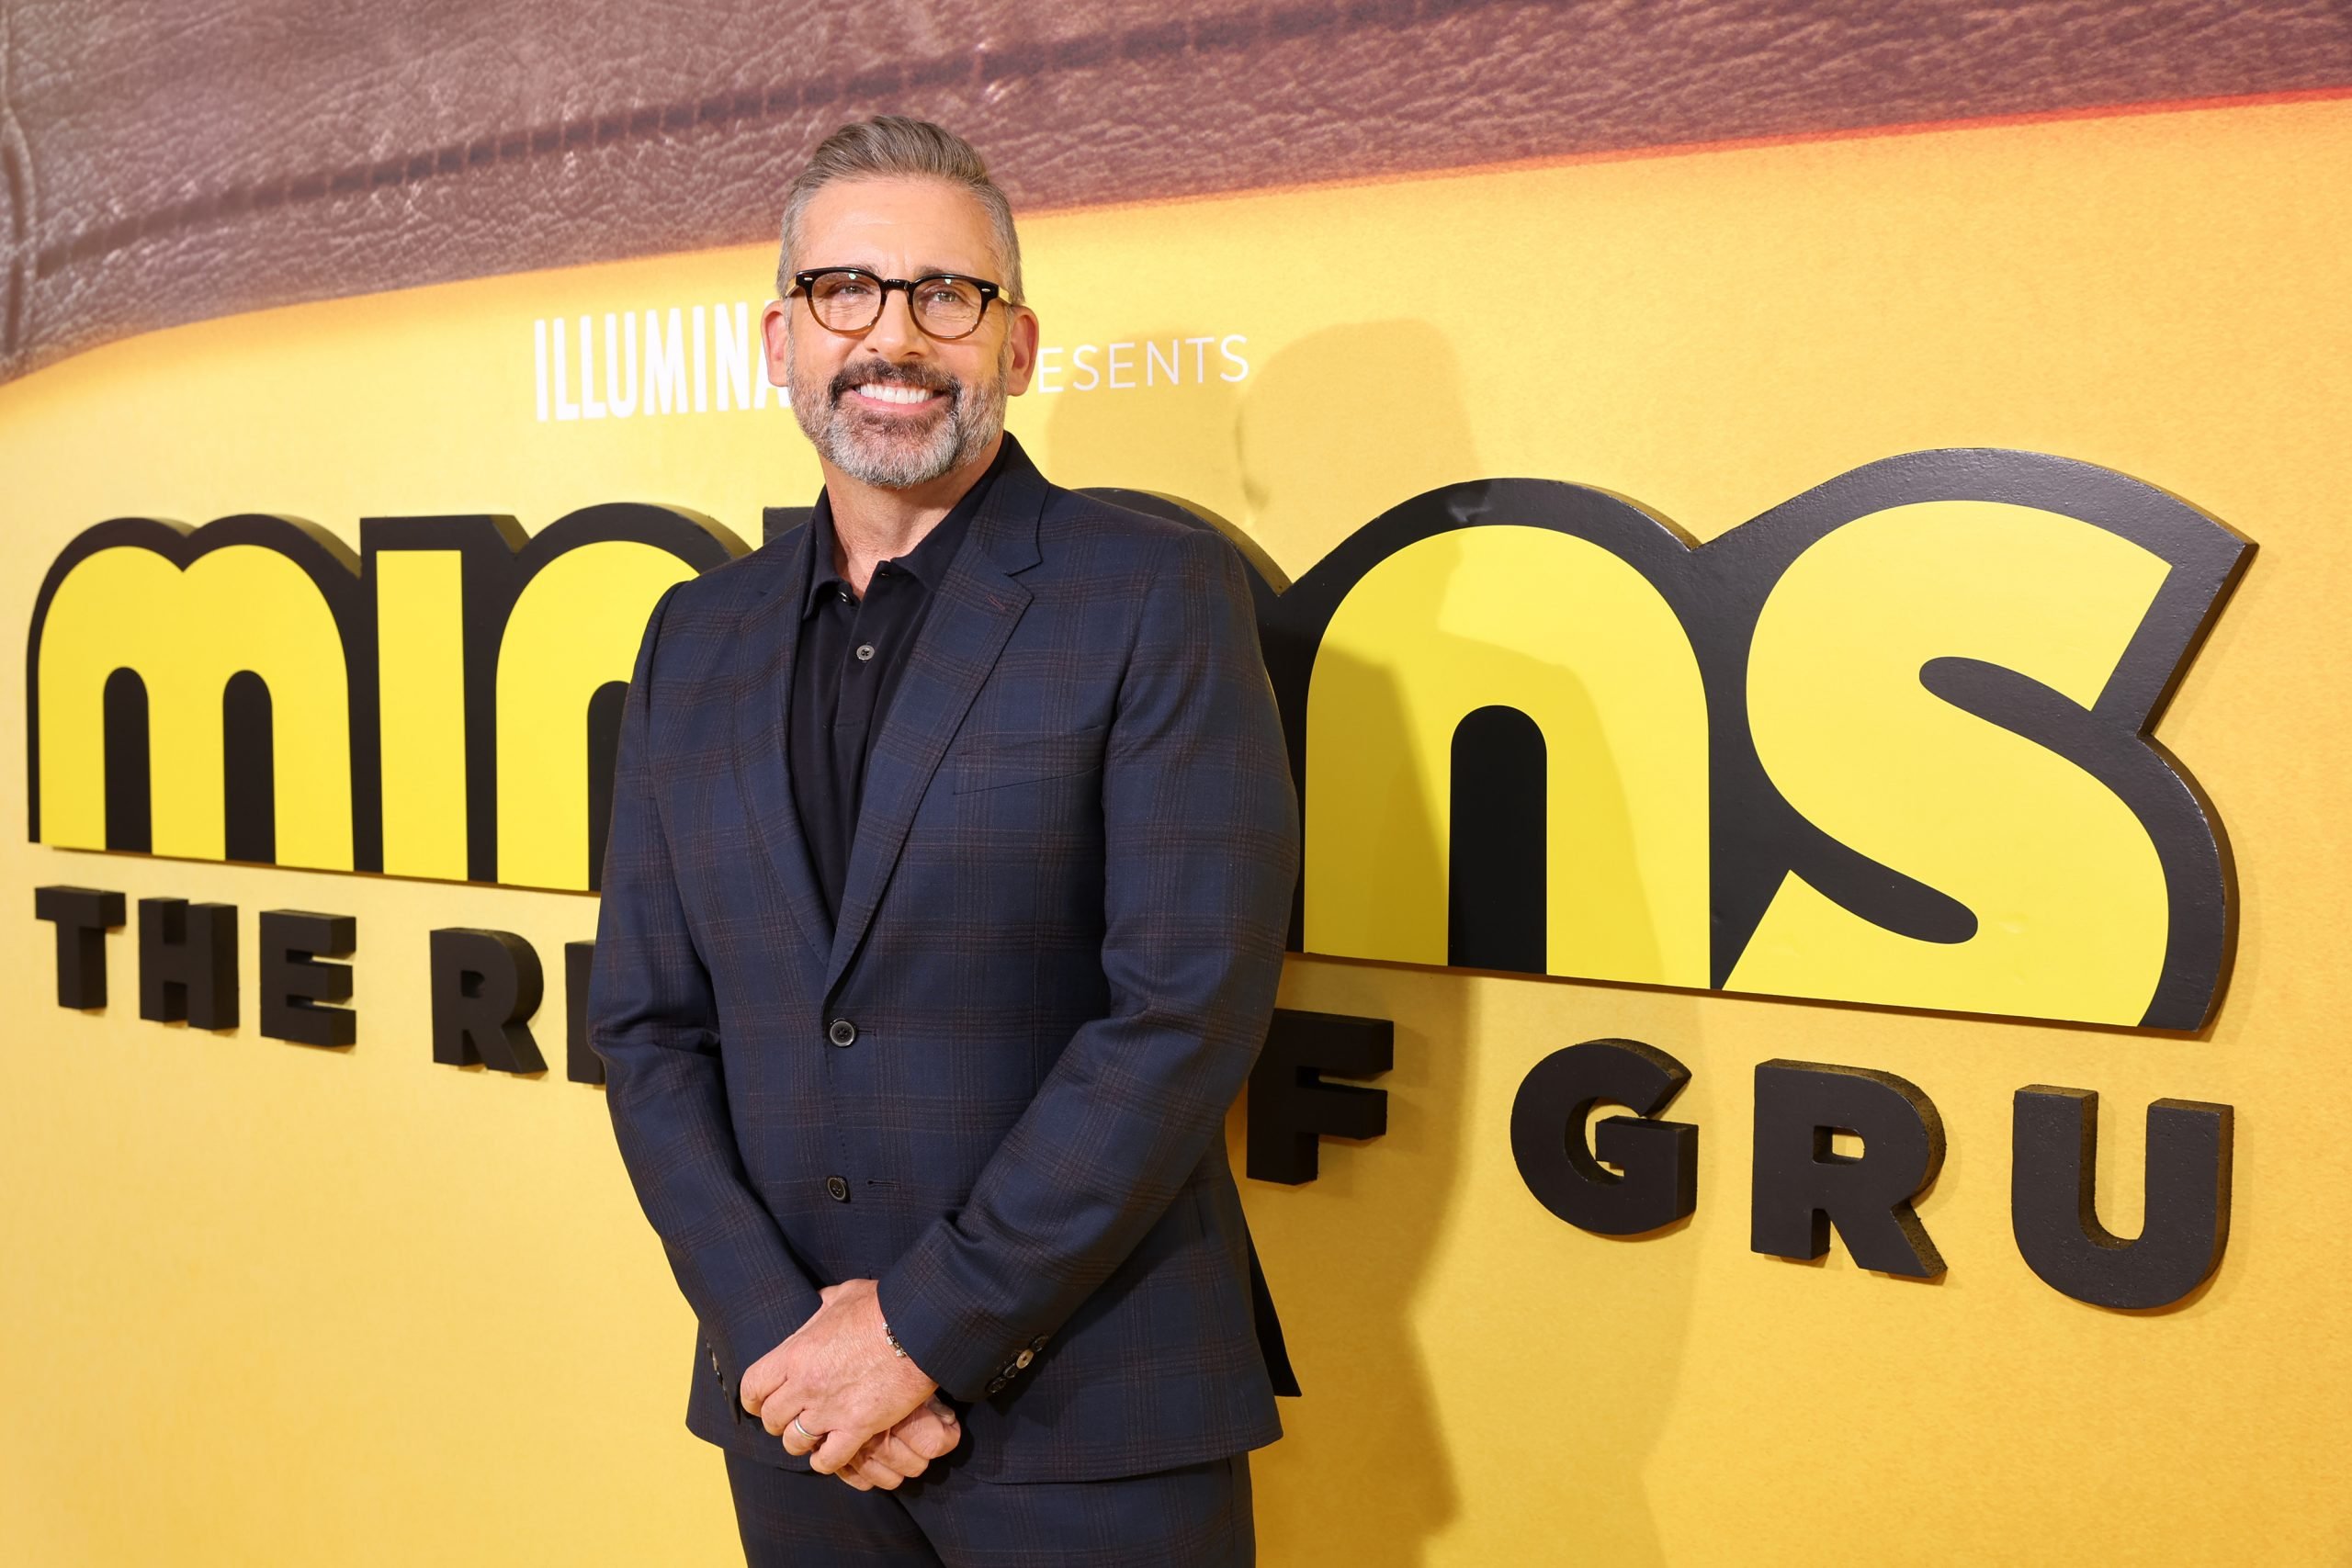 Steve Carell attends the movie premiere of Minions: The Rise of Gru